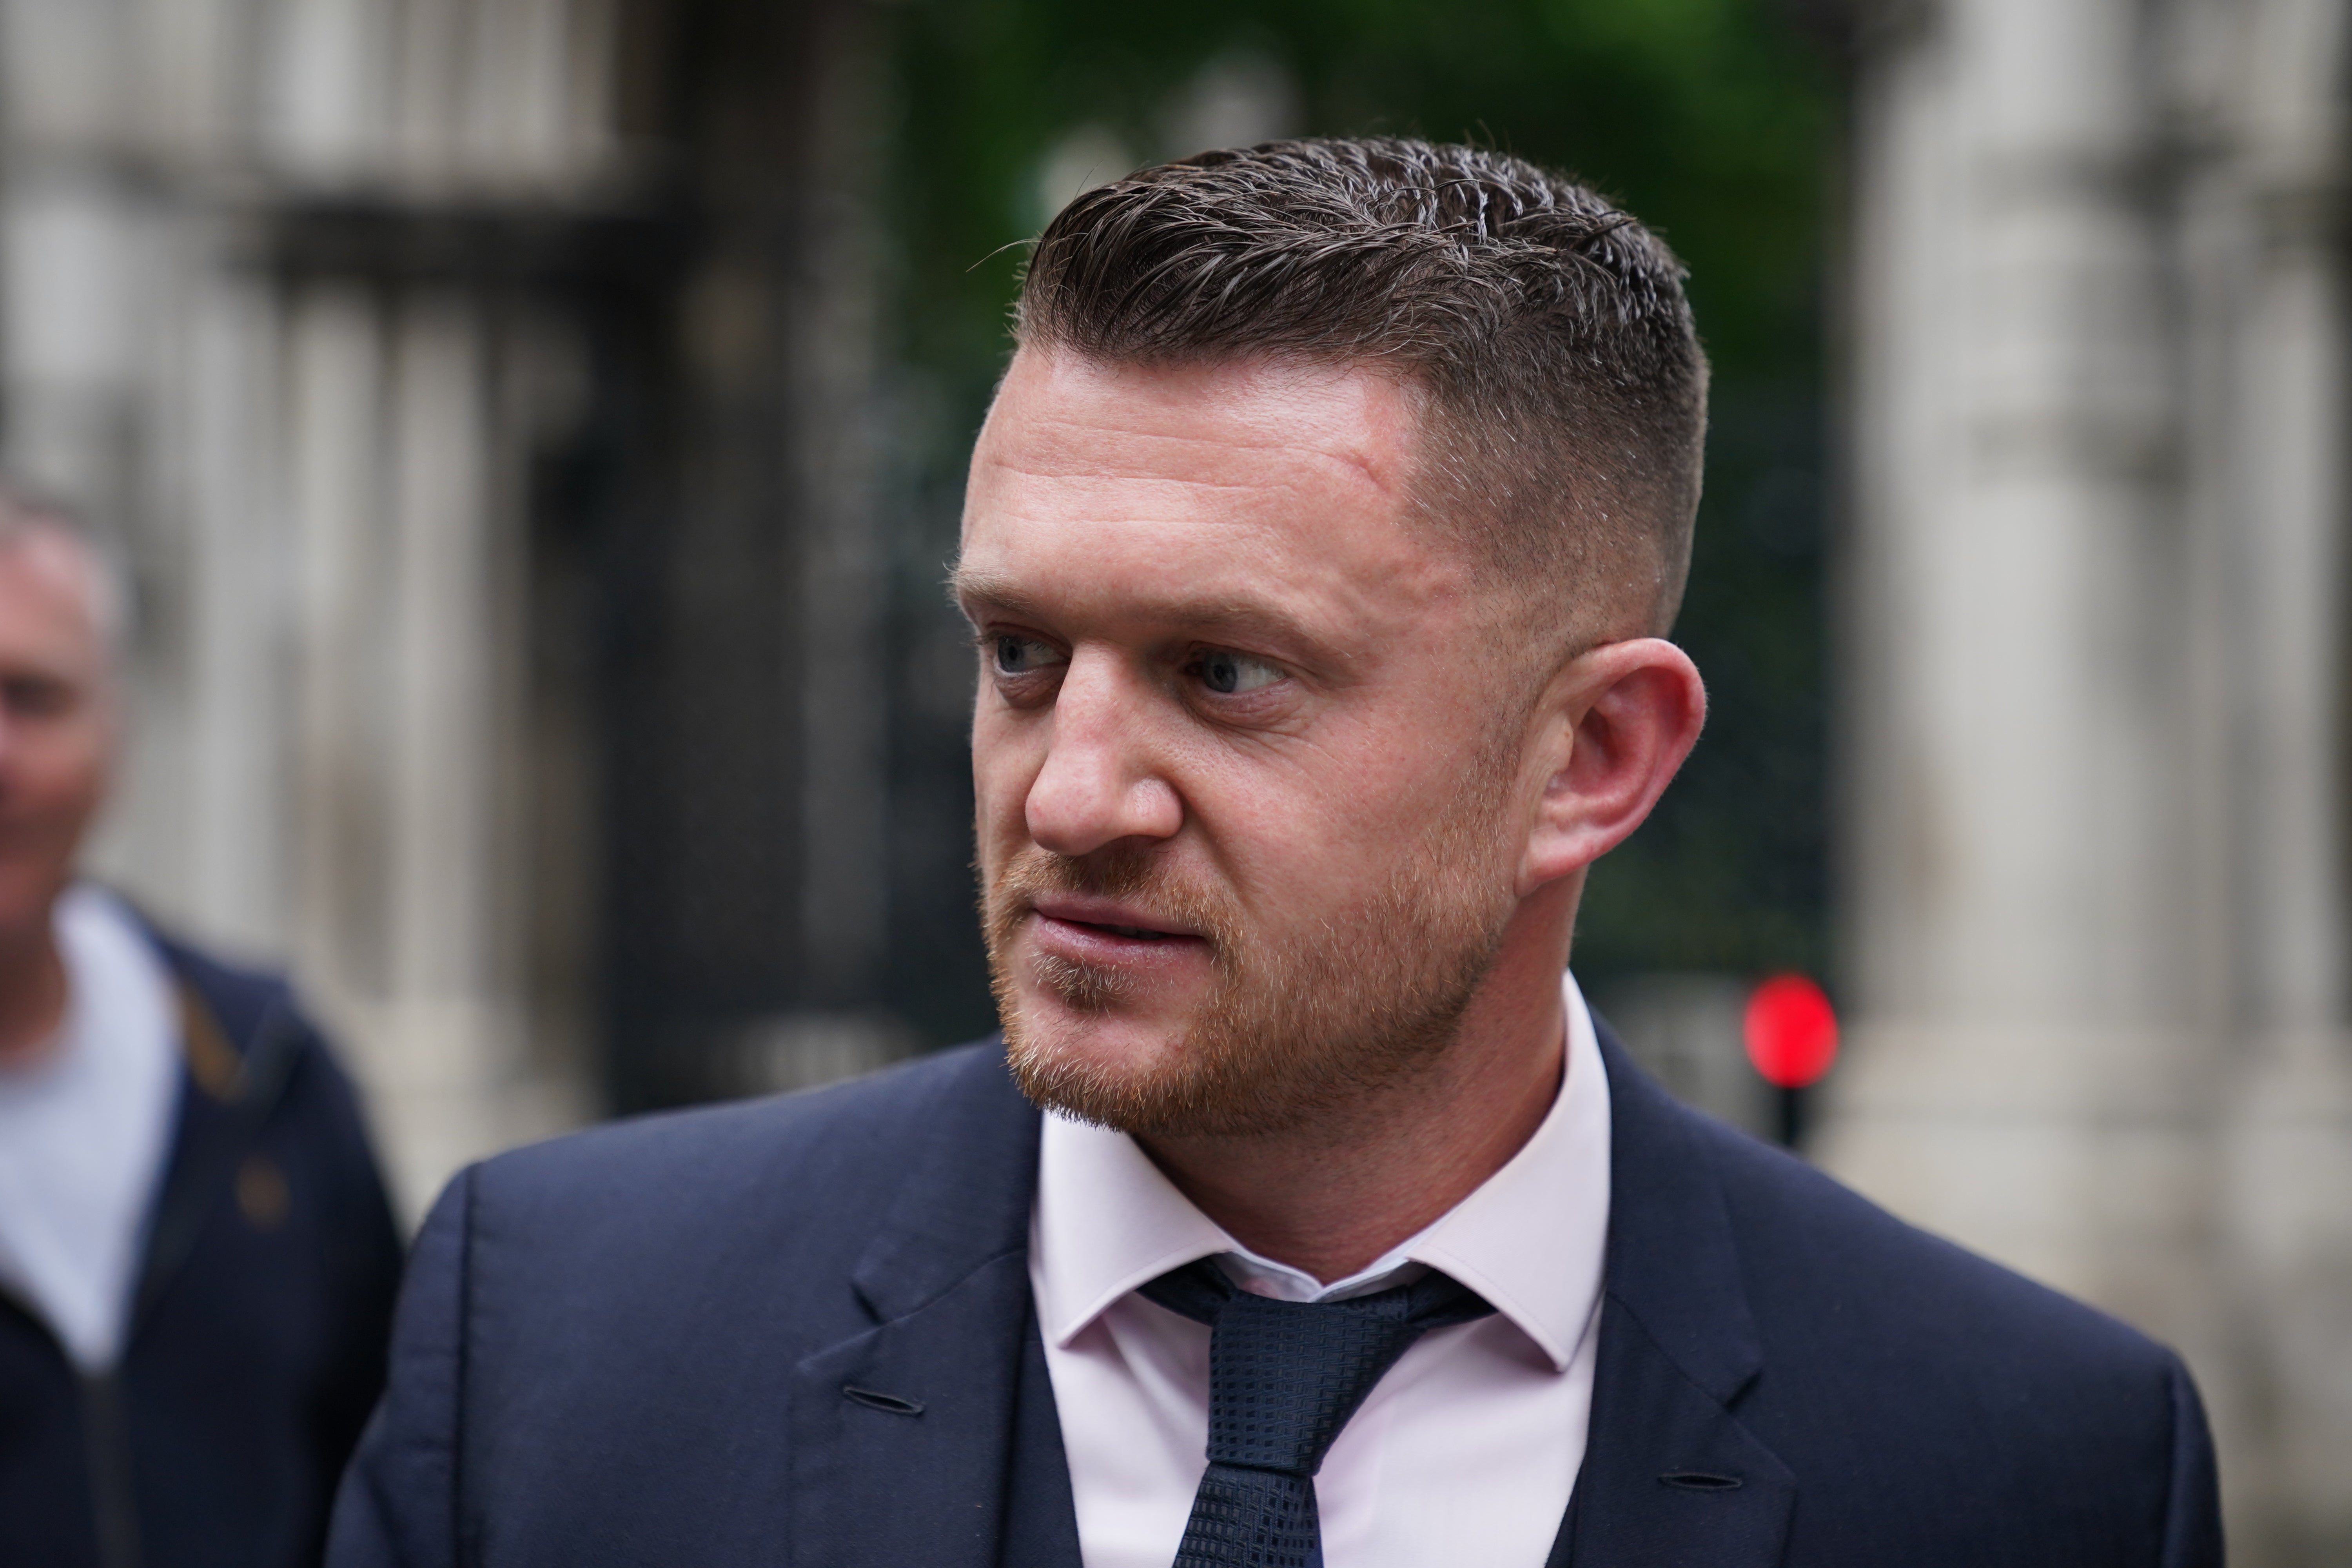 Tommy Robinson gave evidence about his finances after he lost a libel case brought by a Syrian teenager, Jamal Hijaz